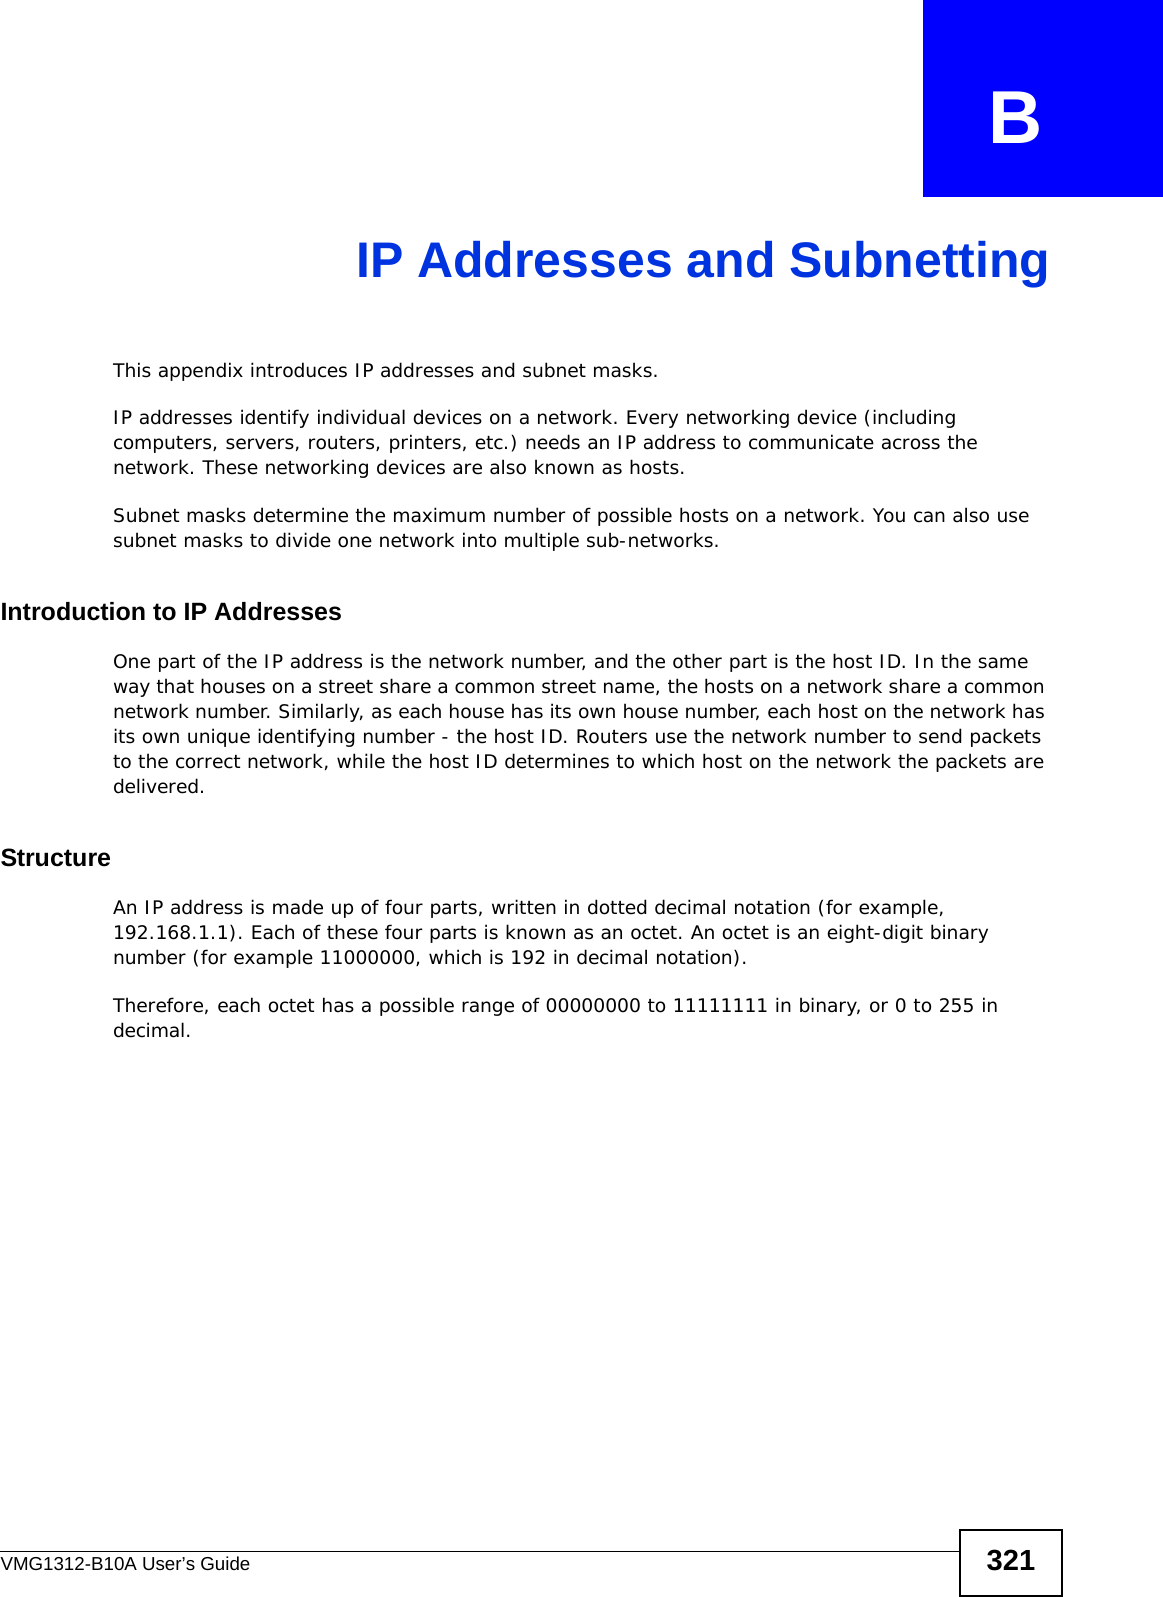 VMG1312-B10A User’s Guide 321APPENDIX   BIP Addresses and SubnettingThis appendix introduces IP addresses and subnet masks. IP addresses identify individual devices on a network. Every networking device (including computers, servers, routers, printers, etc.) needs an IP address to communicate across the network. These networking devices are also known as hosts.Subnet masks determine the maximum number of possible hosts on a network. You can also use subnet masks to divide one network into multiple sub-networks.Introduction to IP AddressesOne part of the IP address is the network number, and the other part is the host ID. In the same way that houses on a street share a common street name, the hosts on a network share a common network number. Similarly, as each house has its own house number, each host on the network has its own unique identifying number - the host ID. Routers use the network number to send packets to the correct network, while the host ID determines to which host on the network the packets are delivered.StructureAn IP address is made up of four parts, written in dotted decimal notation (for example, 192.168.1.1). Each of these four parts is known as an octet. An octet is an eight-digit binary number (for example 11000000, which is 192 in decimal notation). Therefore, each octet has a possible range of 00000000 to 11111111 in binary, or 0 to 255 in decimal.